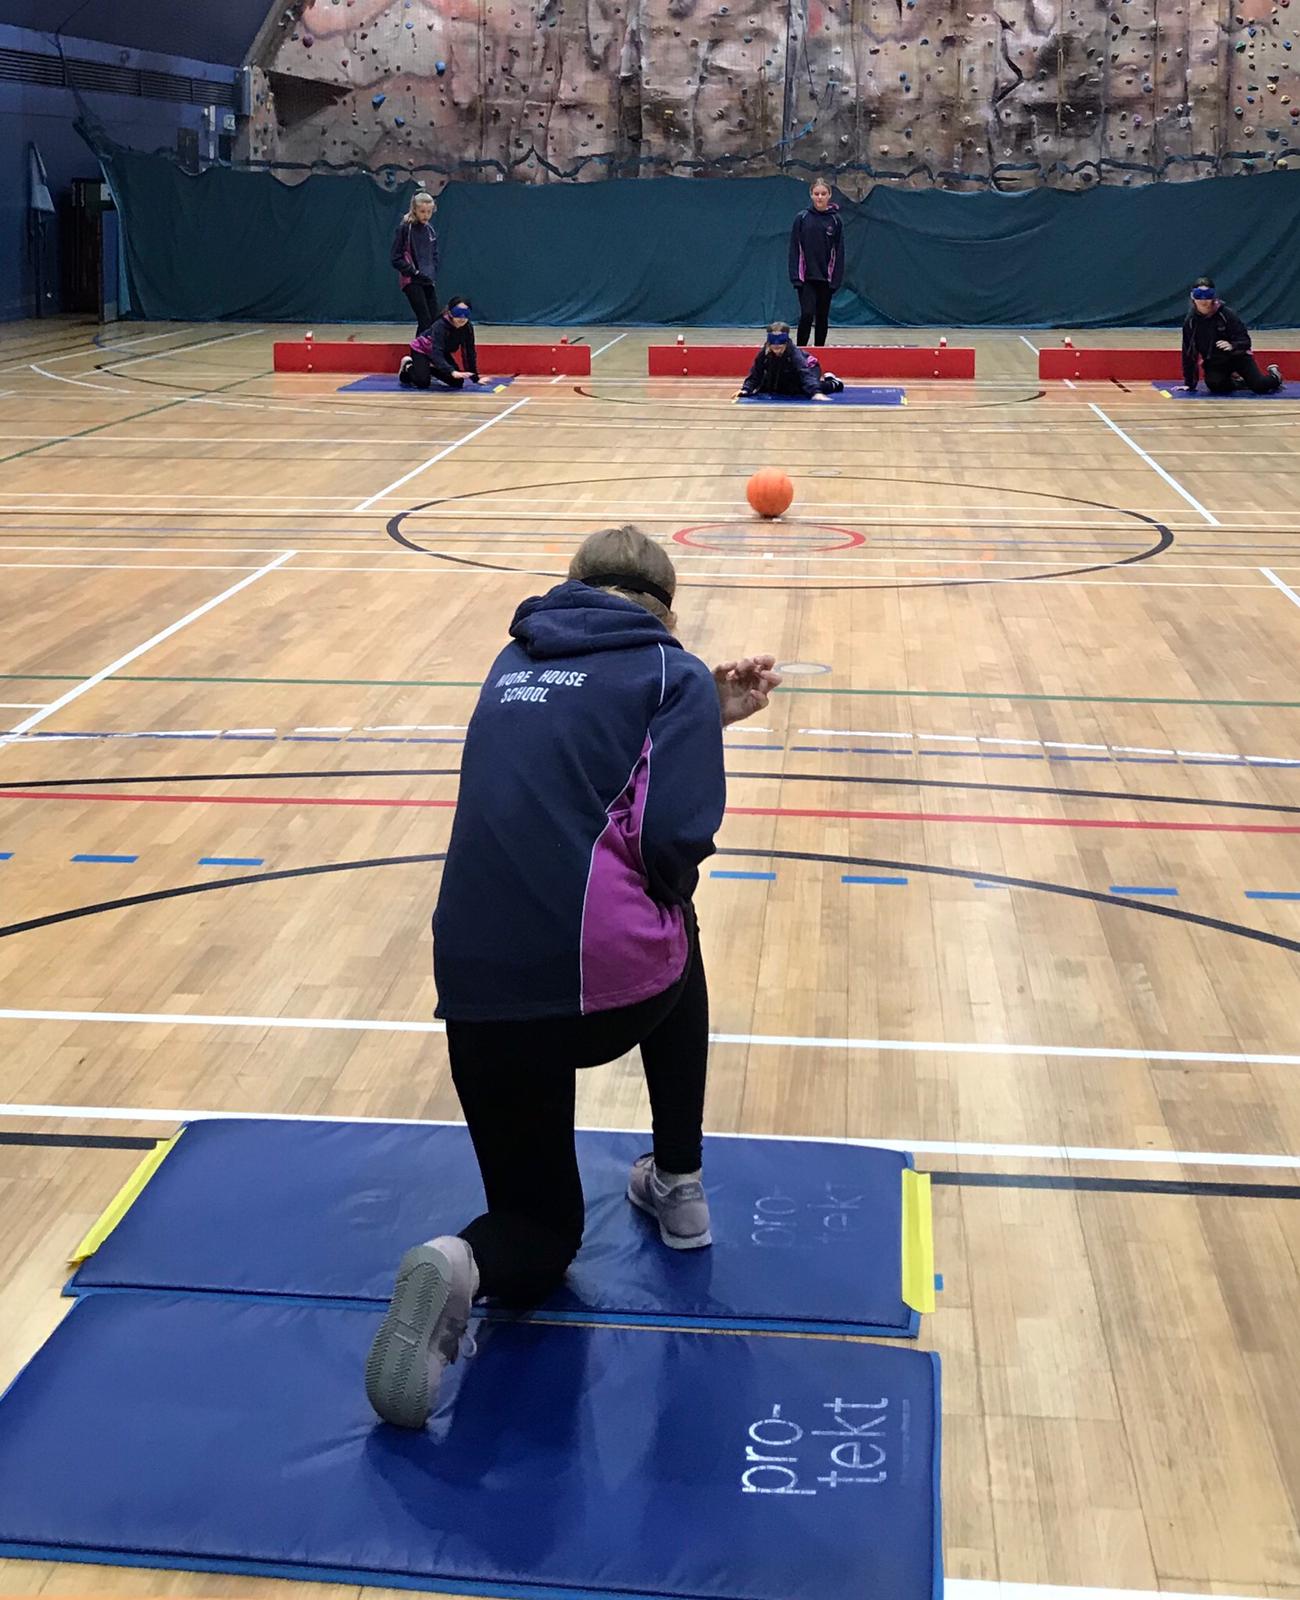 Action shot from Goalball UK School session in London, taken from behind the players